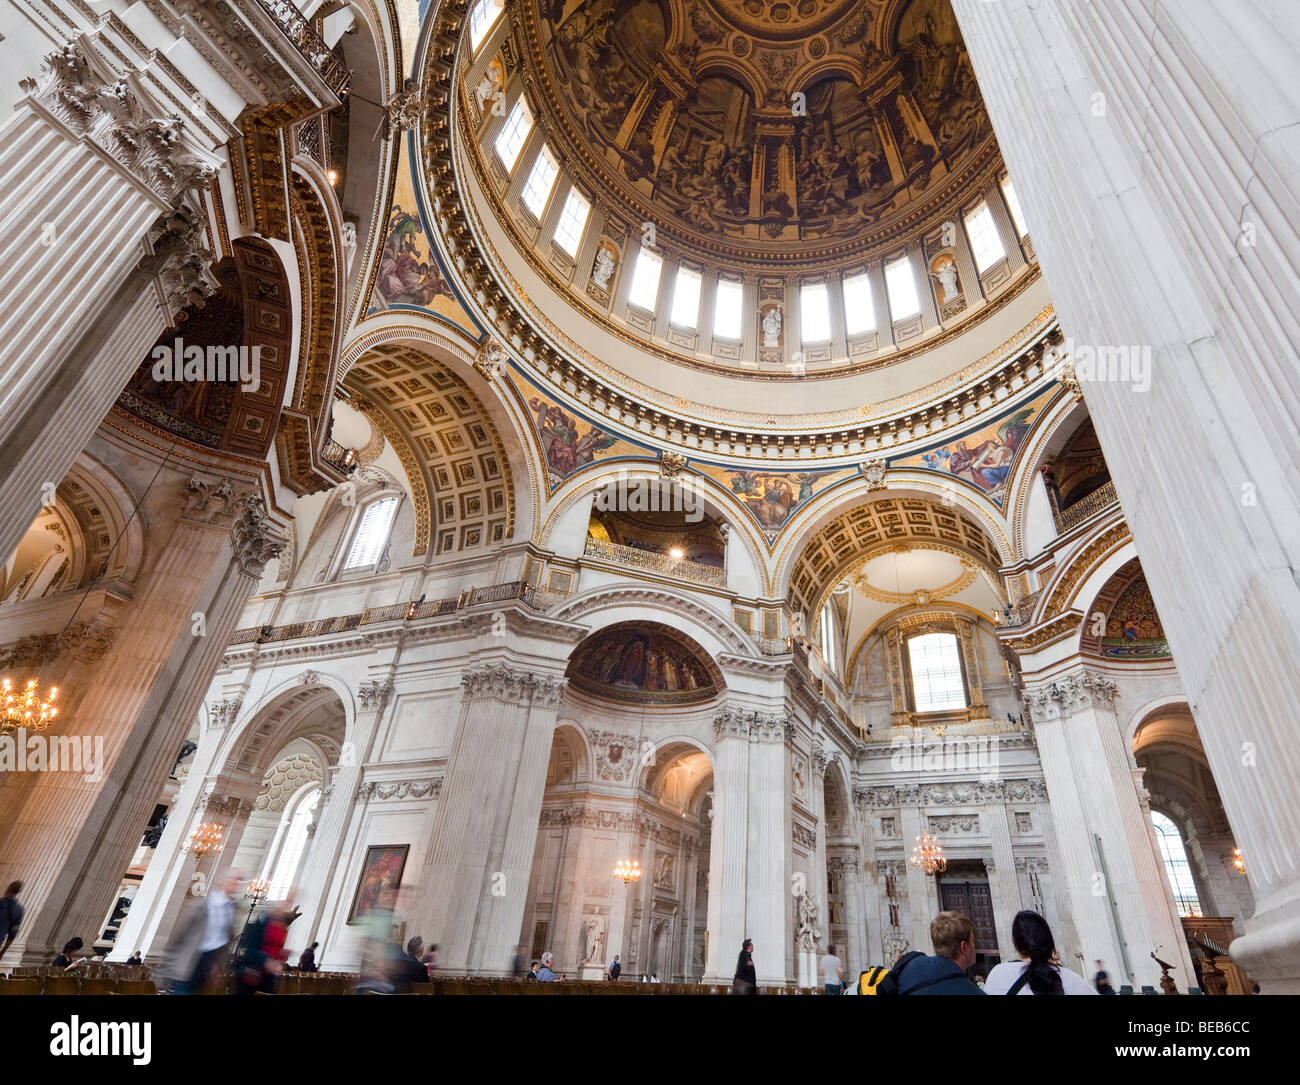 Interieur, St. Pauls Cathedral, London, England, UK Stockfoto